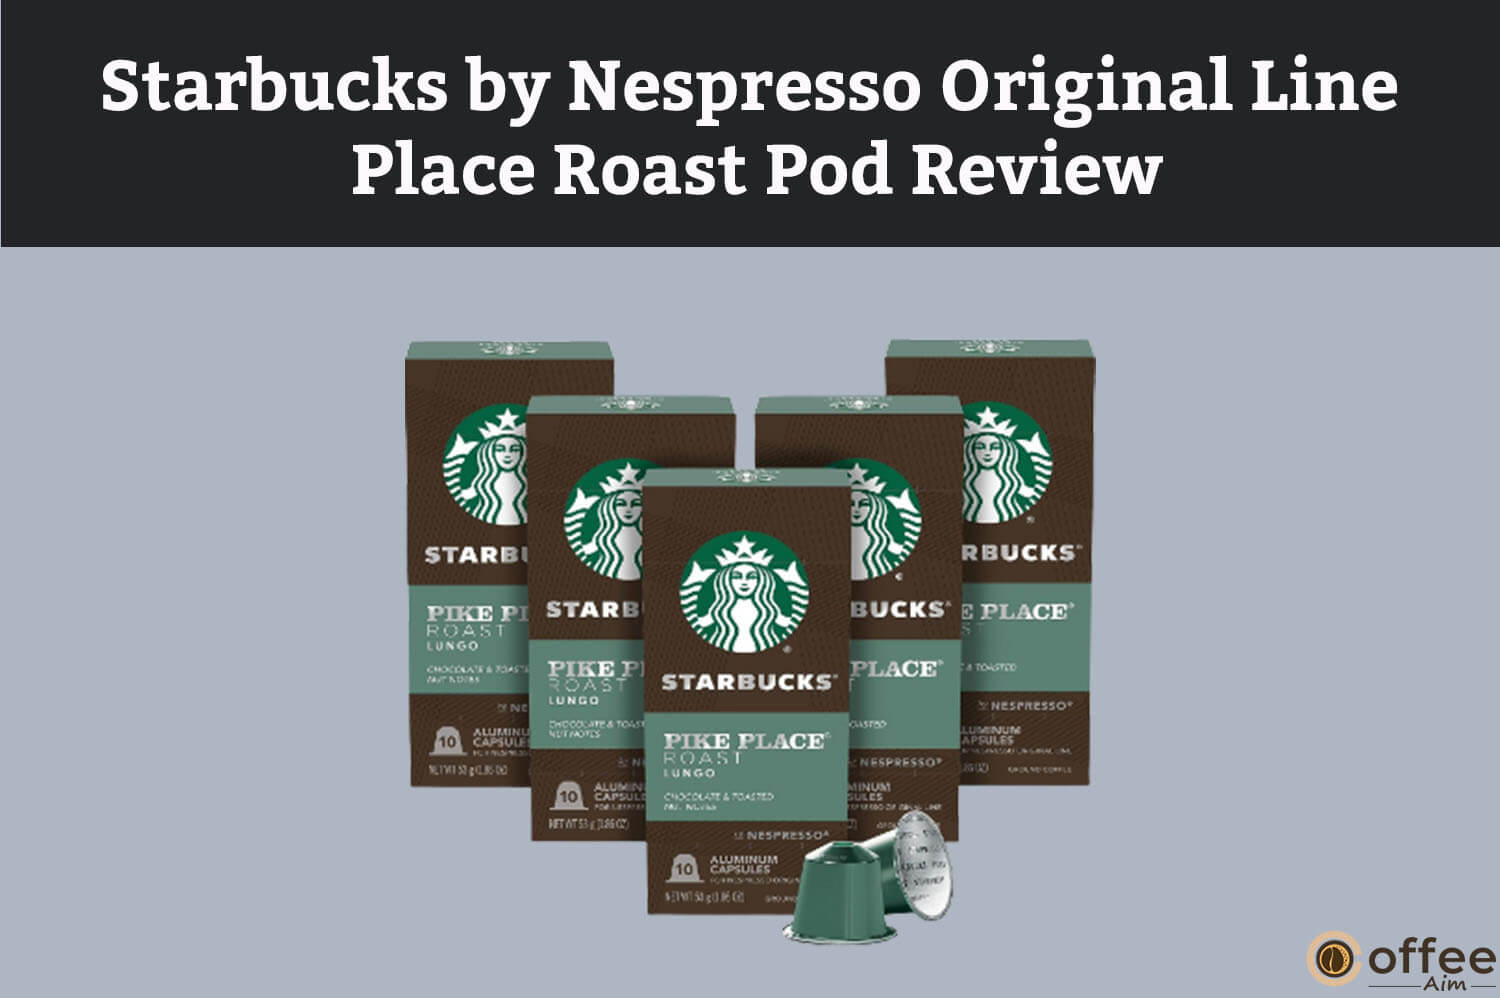 Featured image for the article "Starbucks by Nespresso Original Line Pike Place Roast Pod Review"